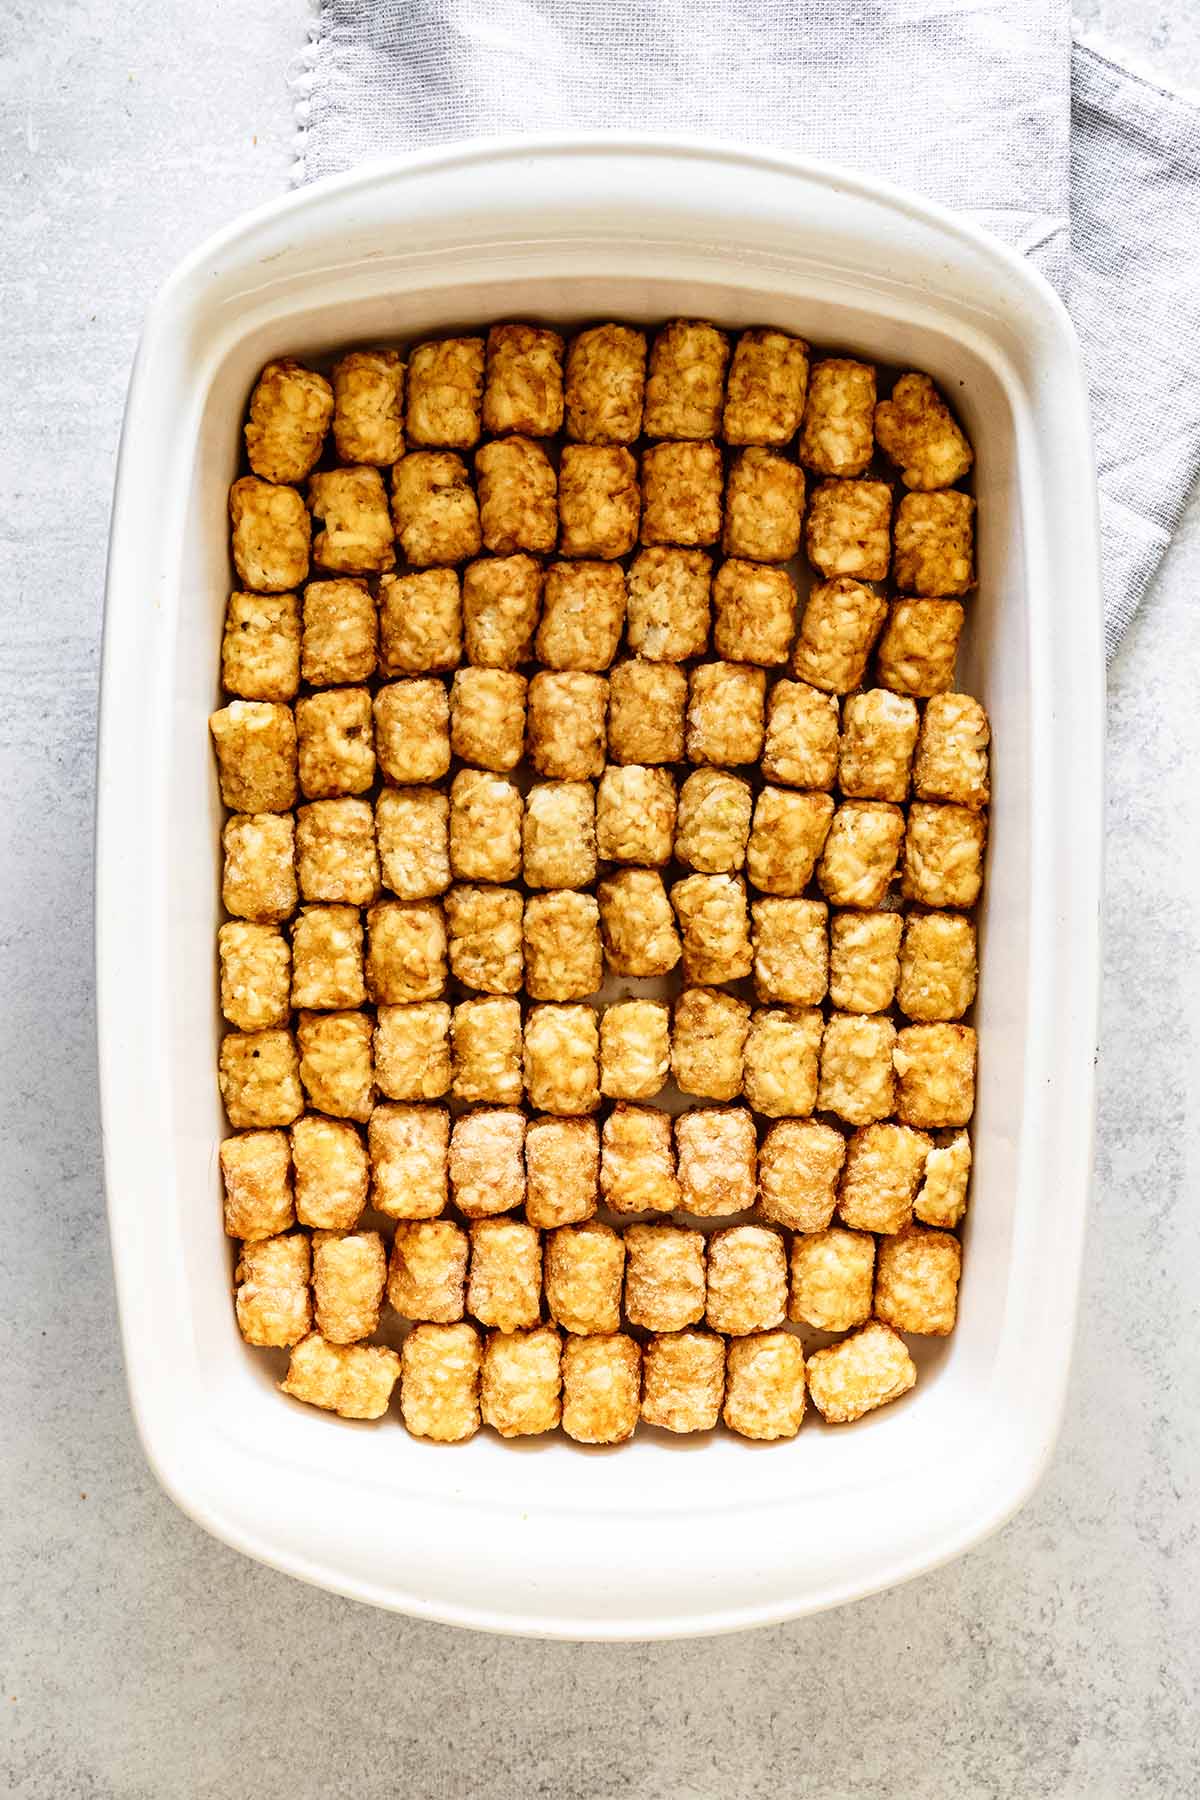 Frozen tater tots lined up at the bottom of a white ceramic baking dish.